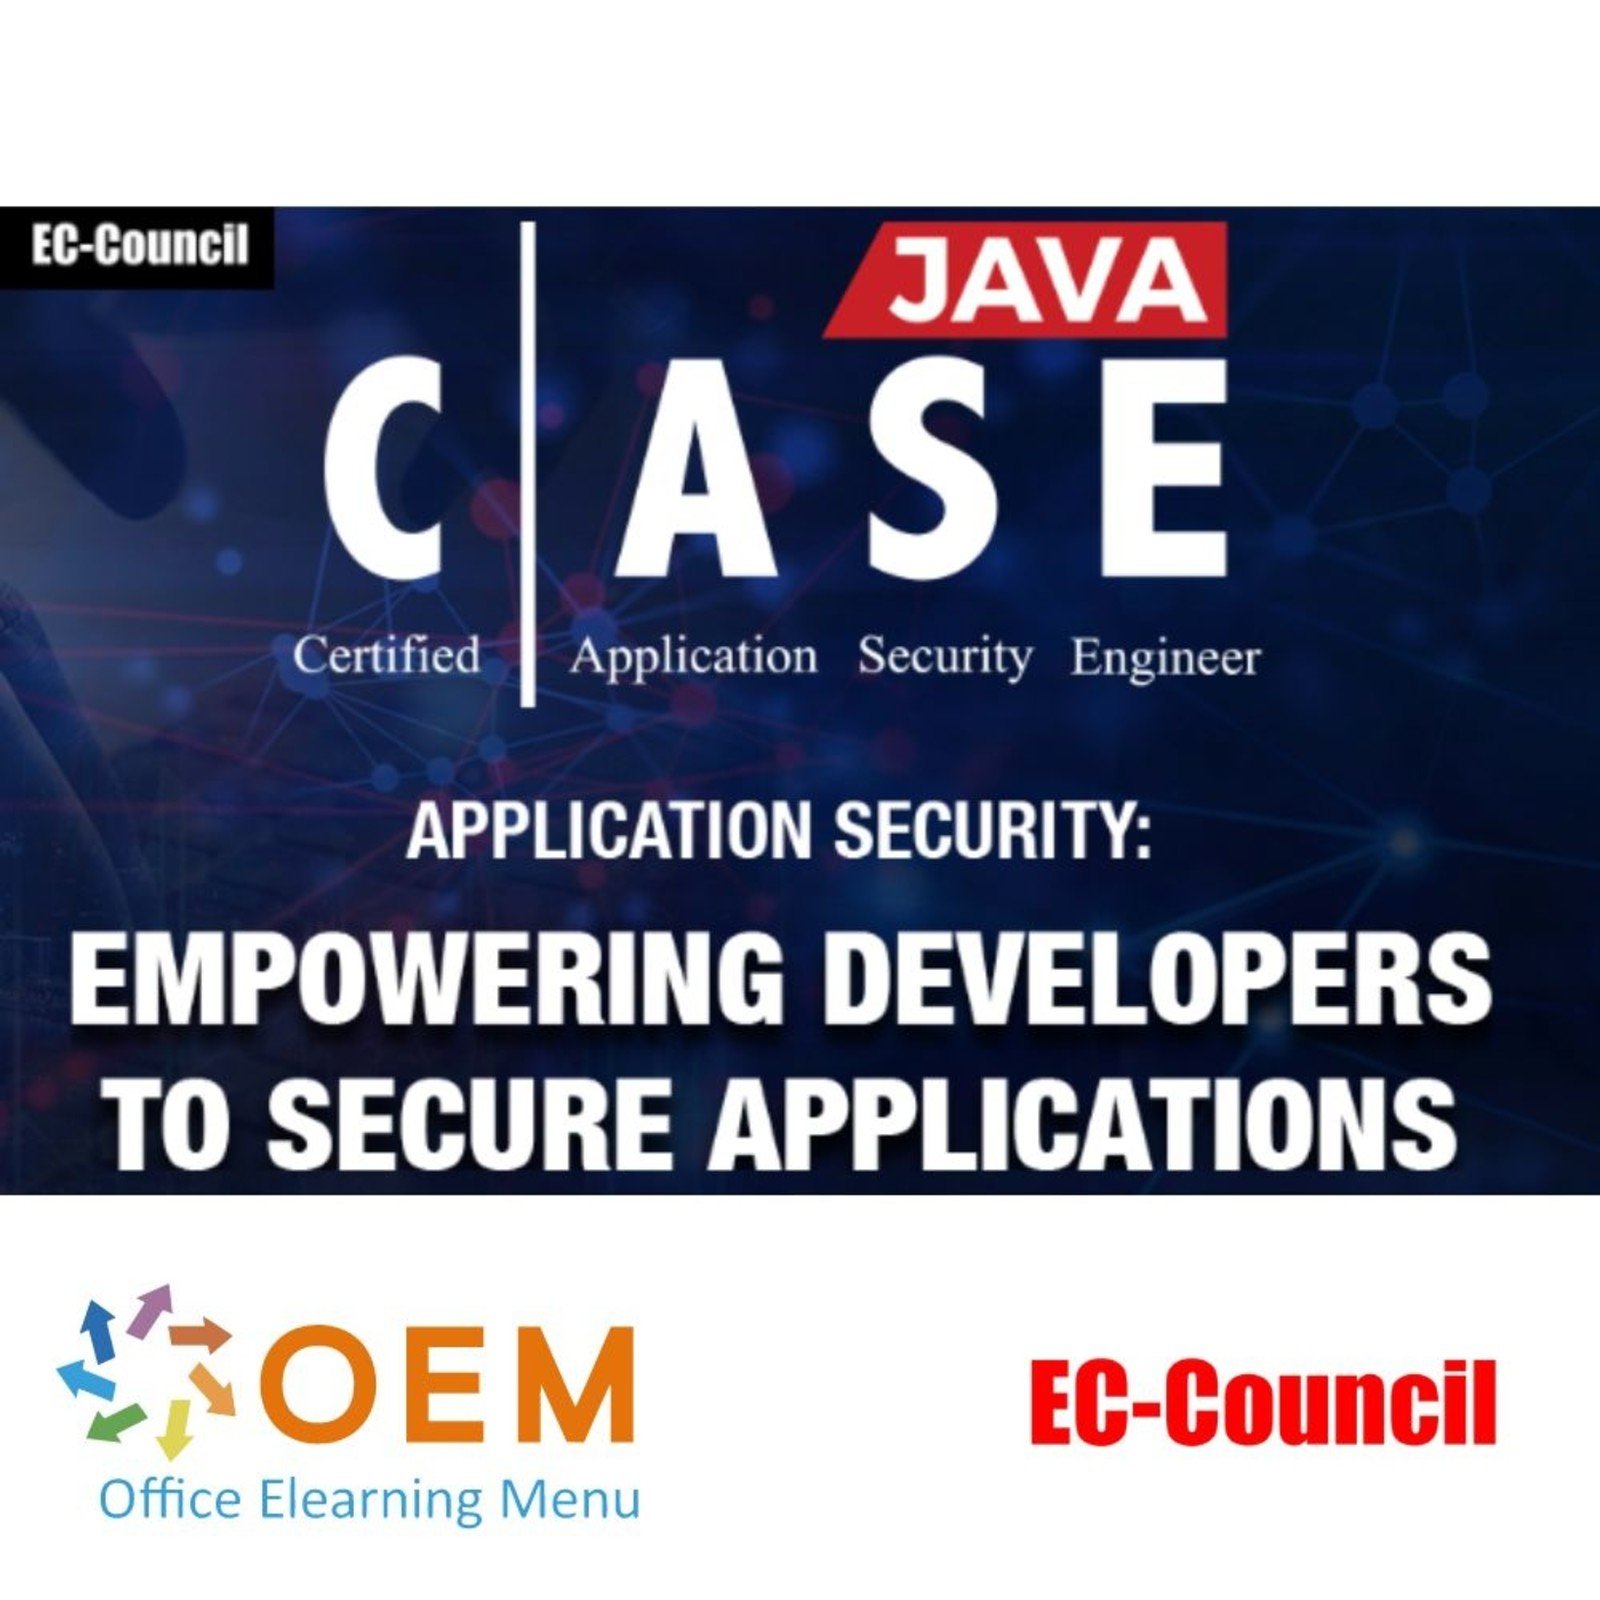 EC-Council Certified Application Security Engineer (CASE Java) Training